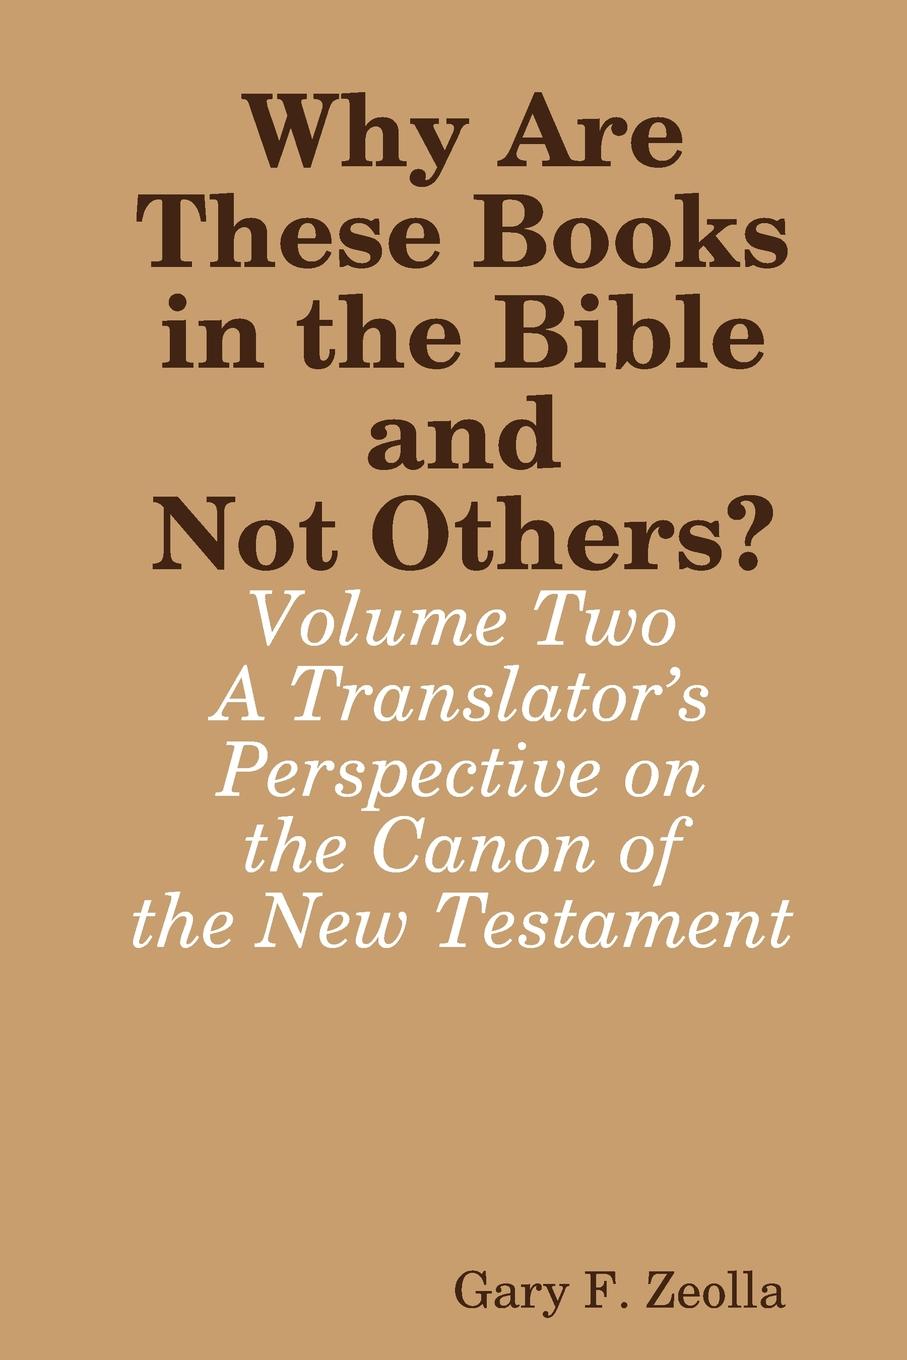 Why Are These Books in the Bible and Not Others. - Volume Two - A Translator.s Perspective on the Canon of the New Testament